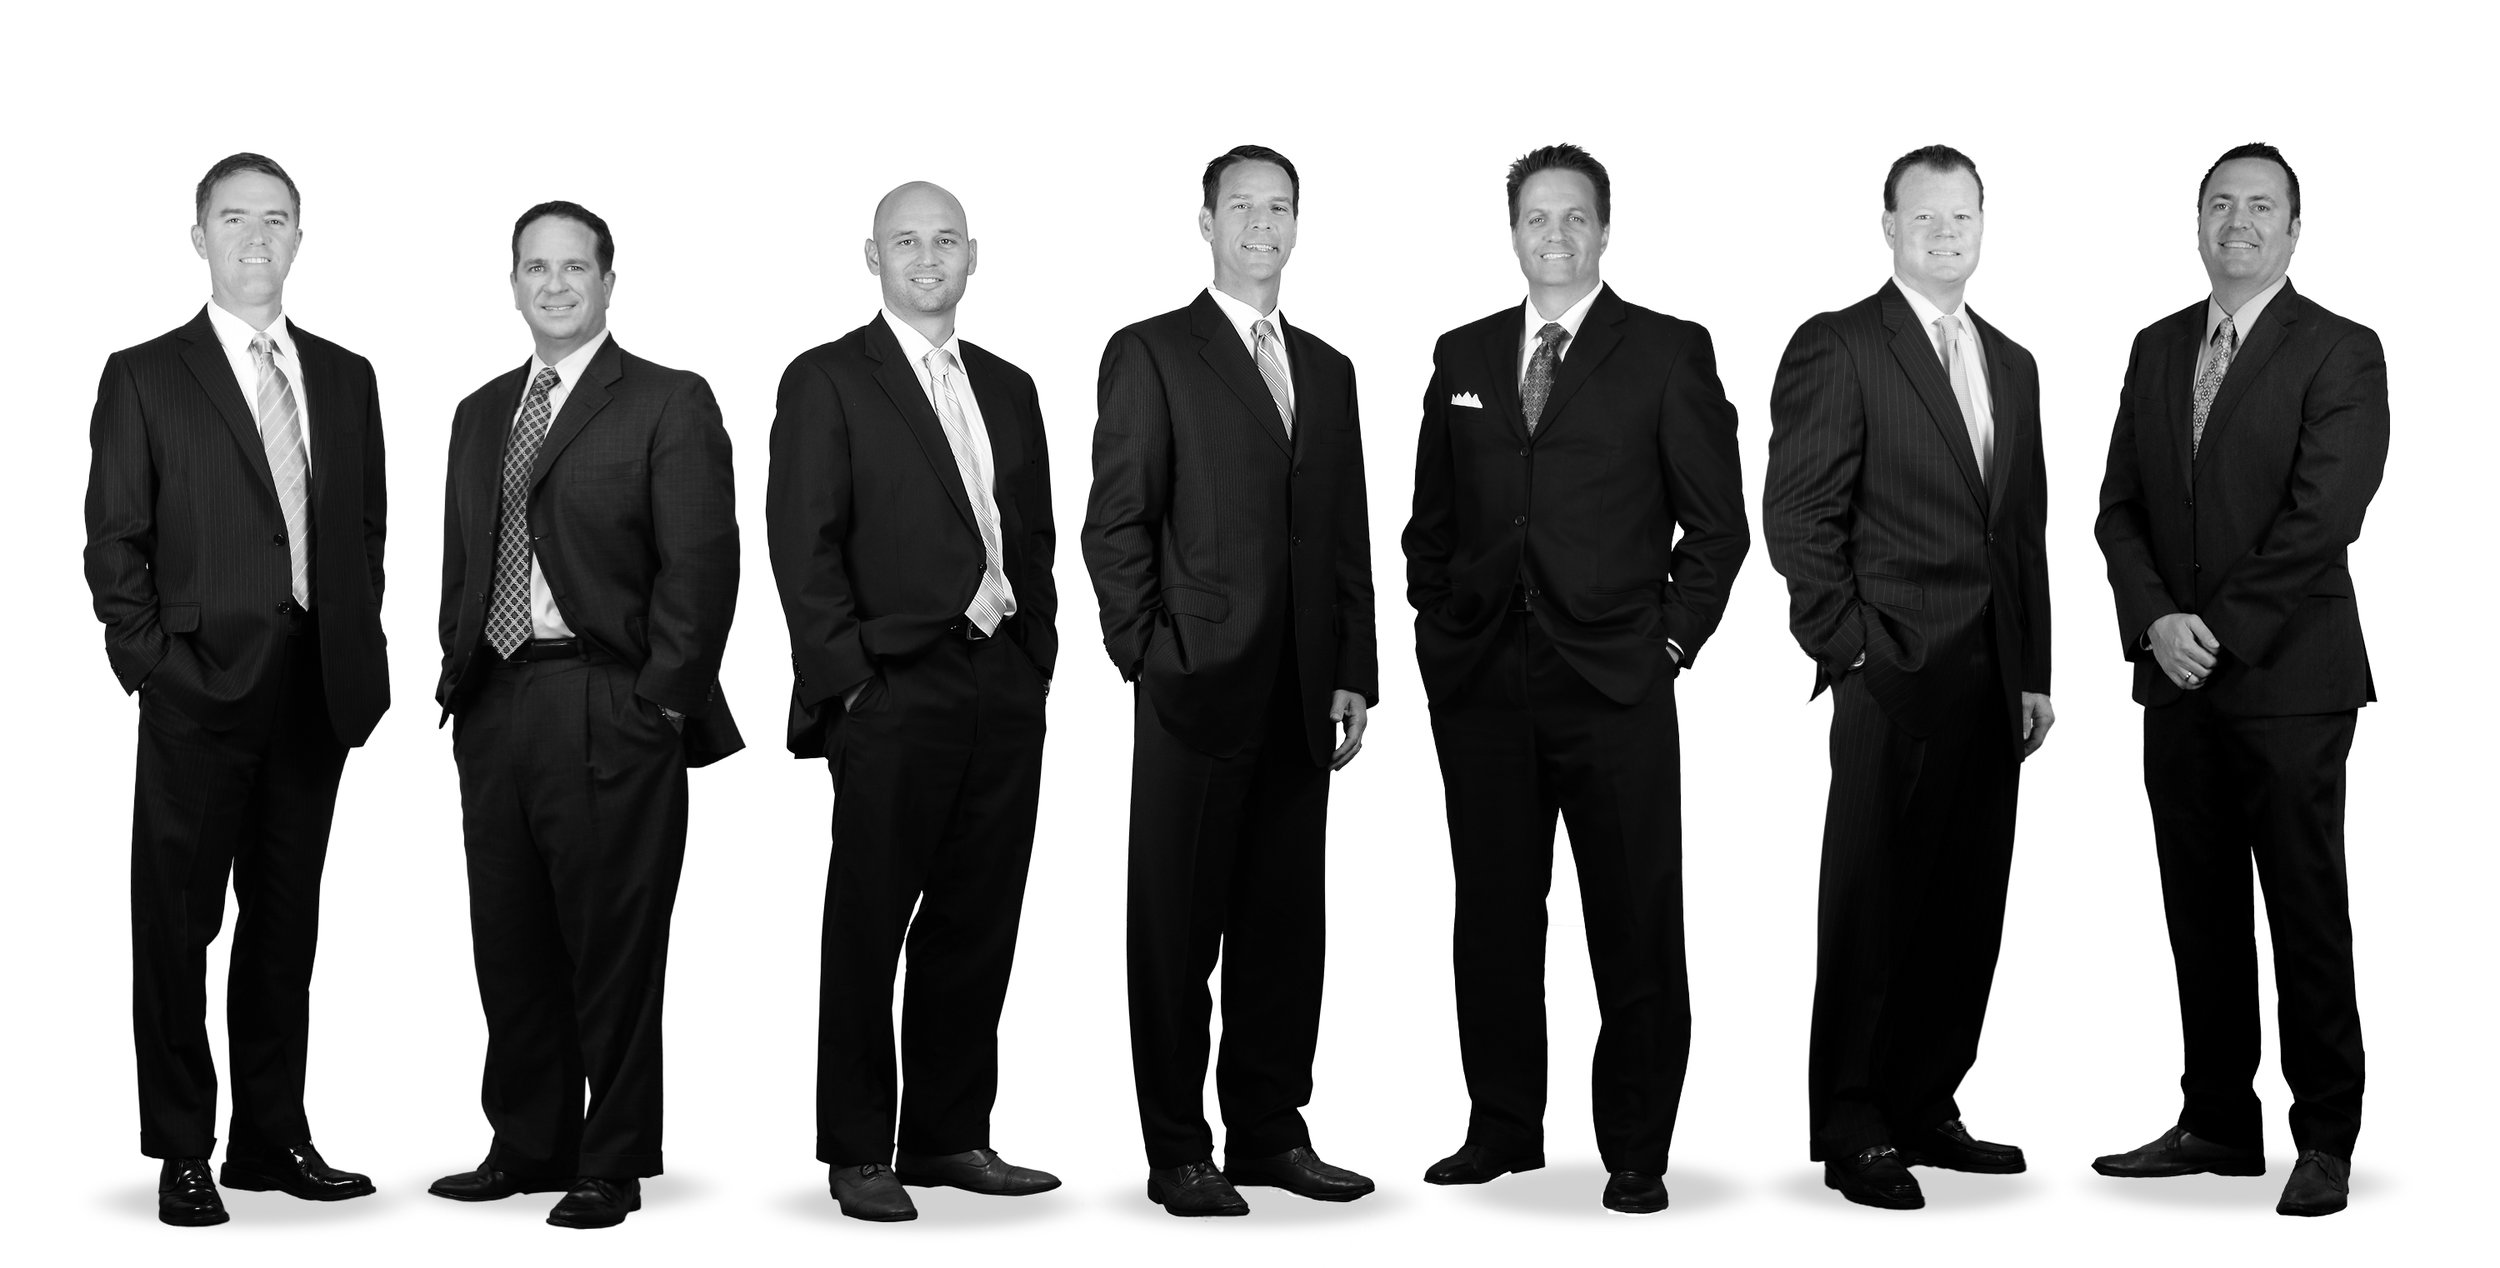  Pictured from left to right: Joe Bronson, Brian Colson, Kelly Disser, Jeff Fischer, Chris Gary, Dan Leahy, & John Whitehead 